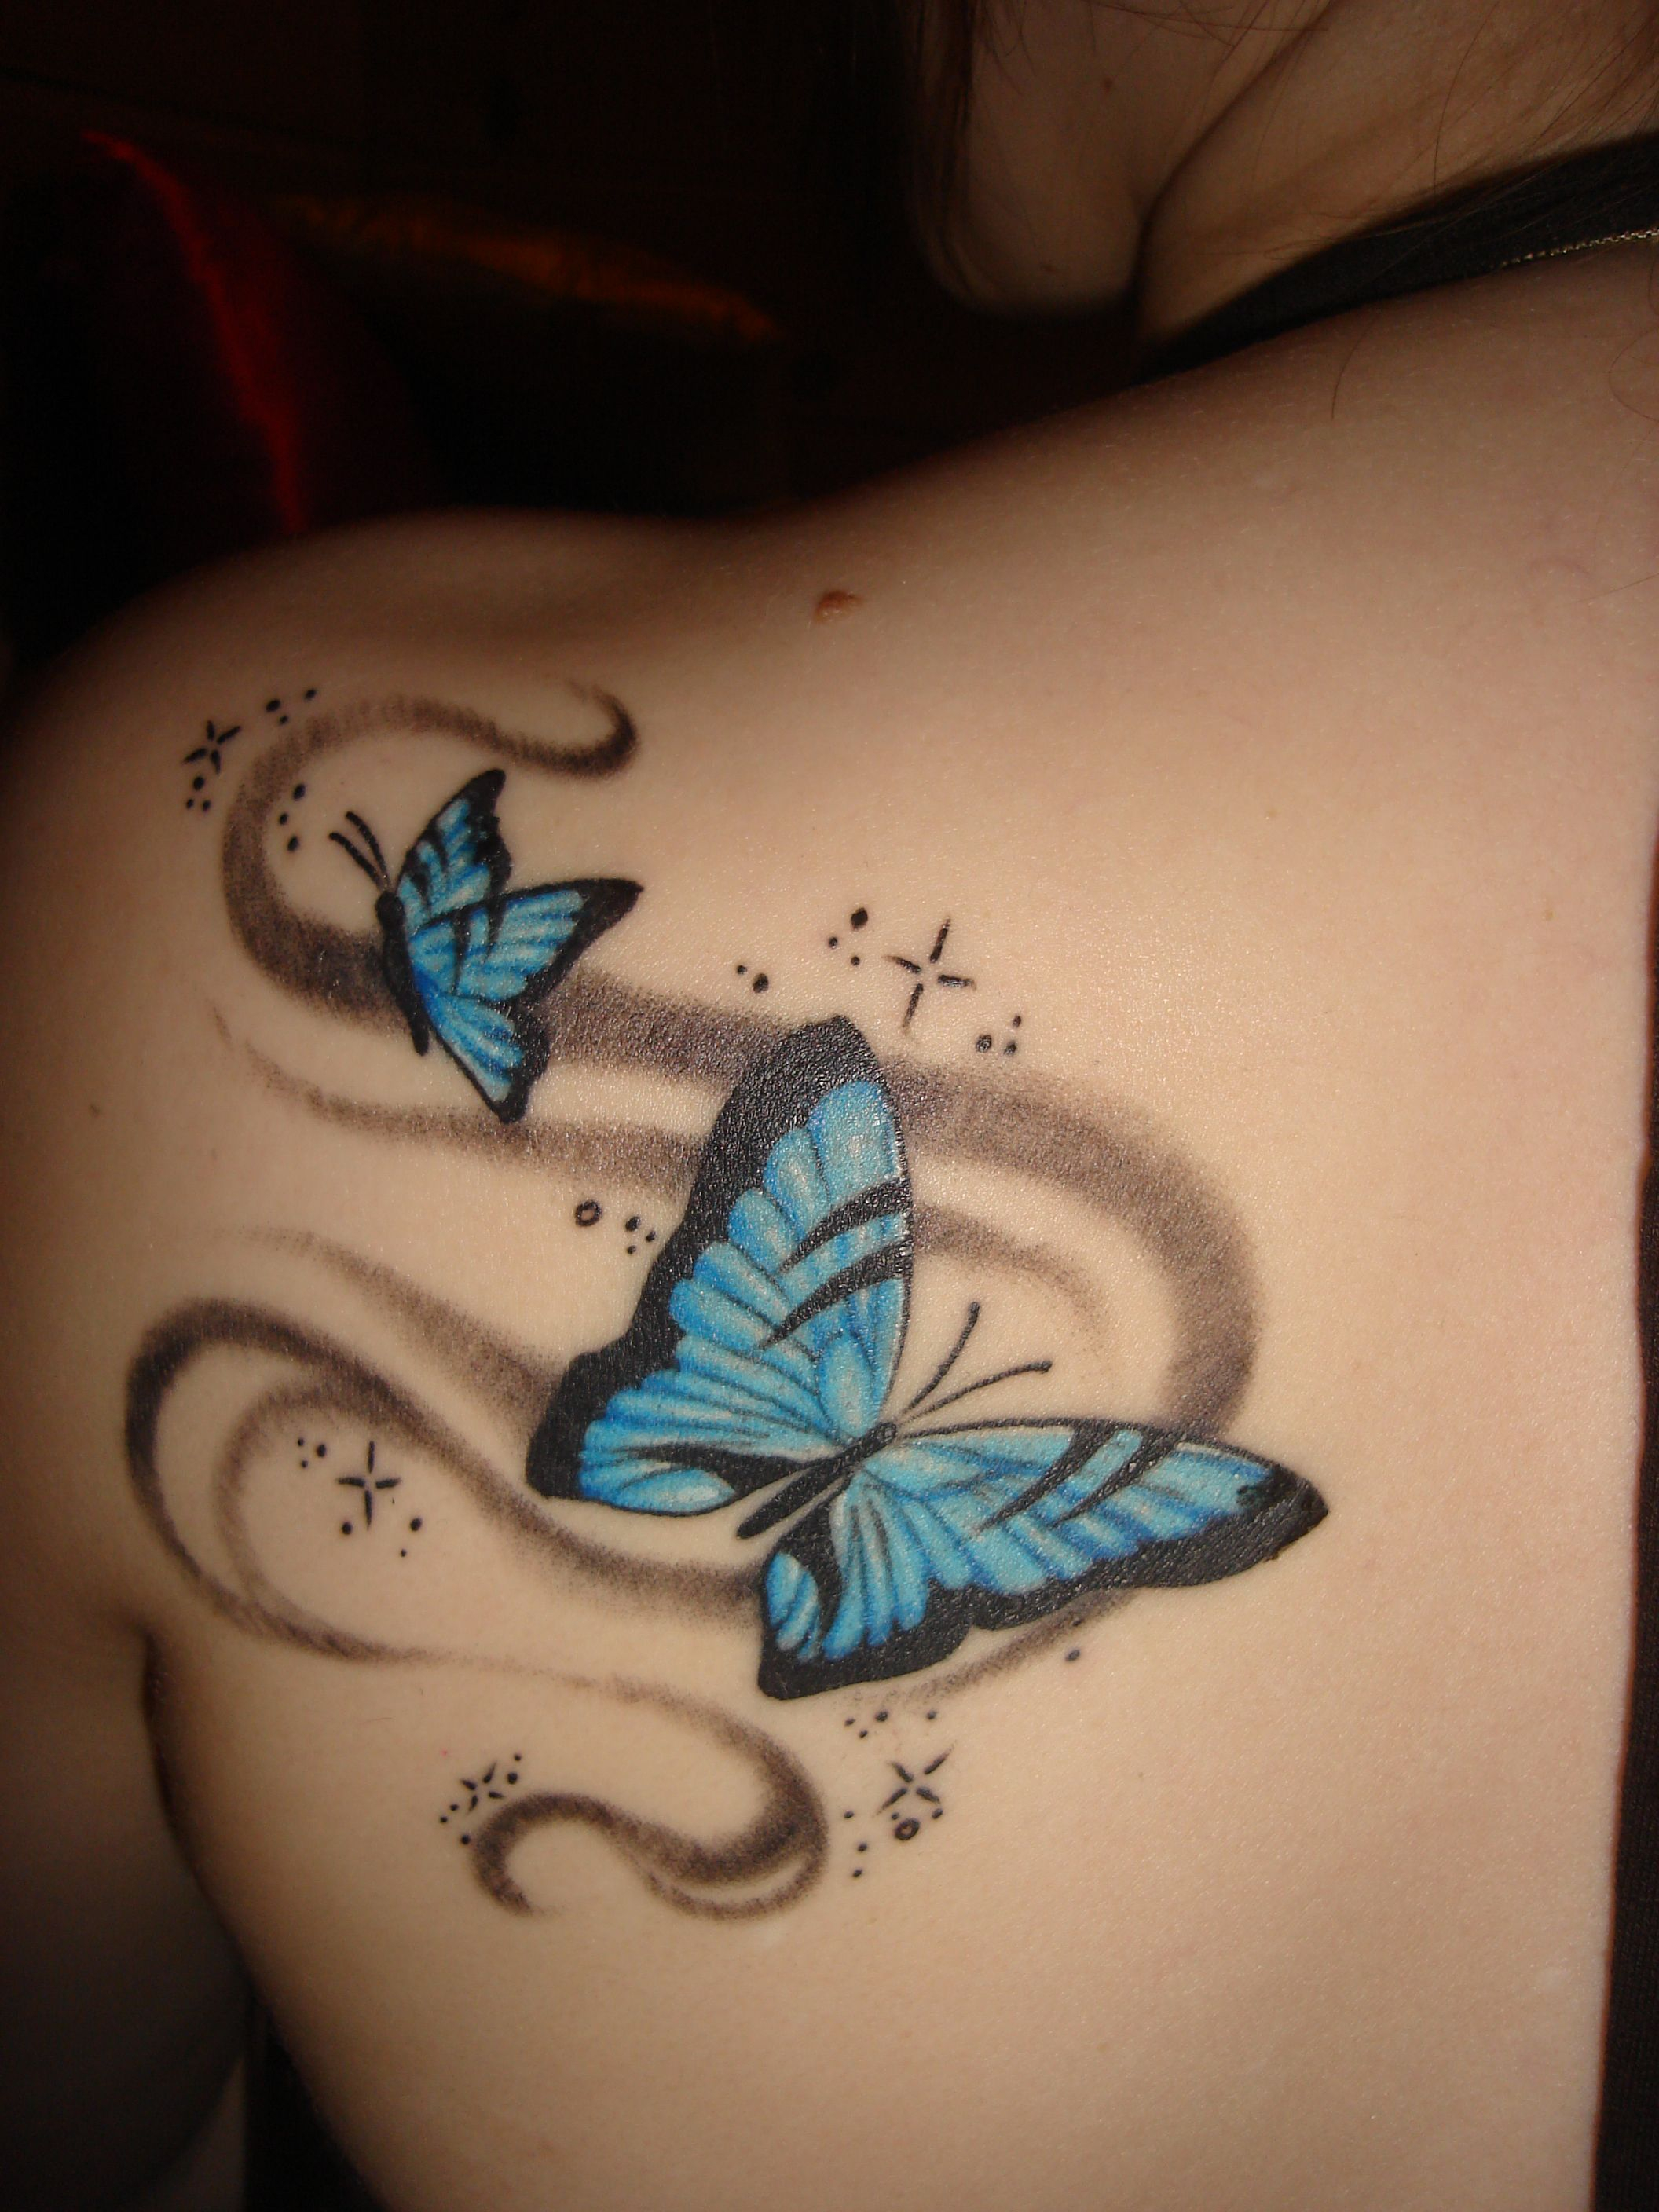 Butterfly Tattoo Meanings And Design Ideas Crazy Tattoos throughout dimensions 2112 X 2816